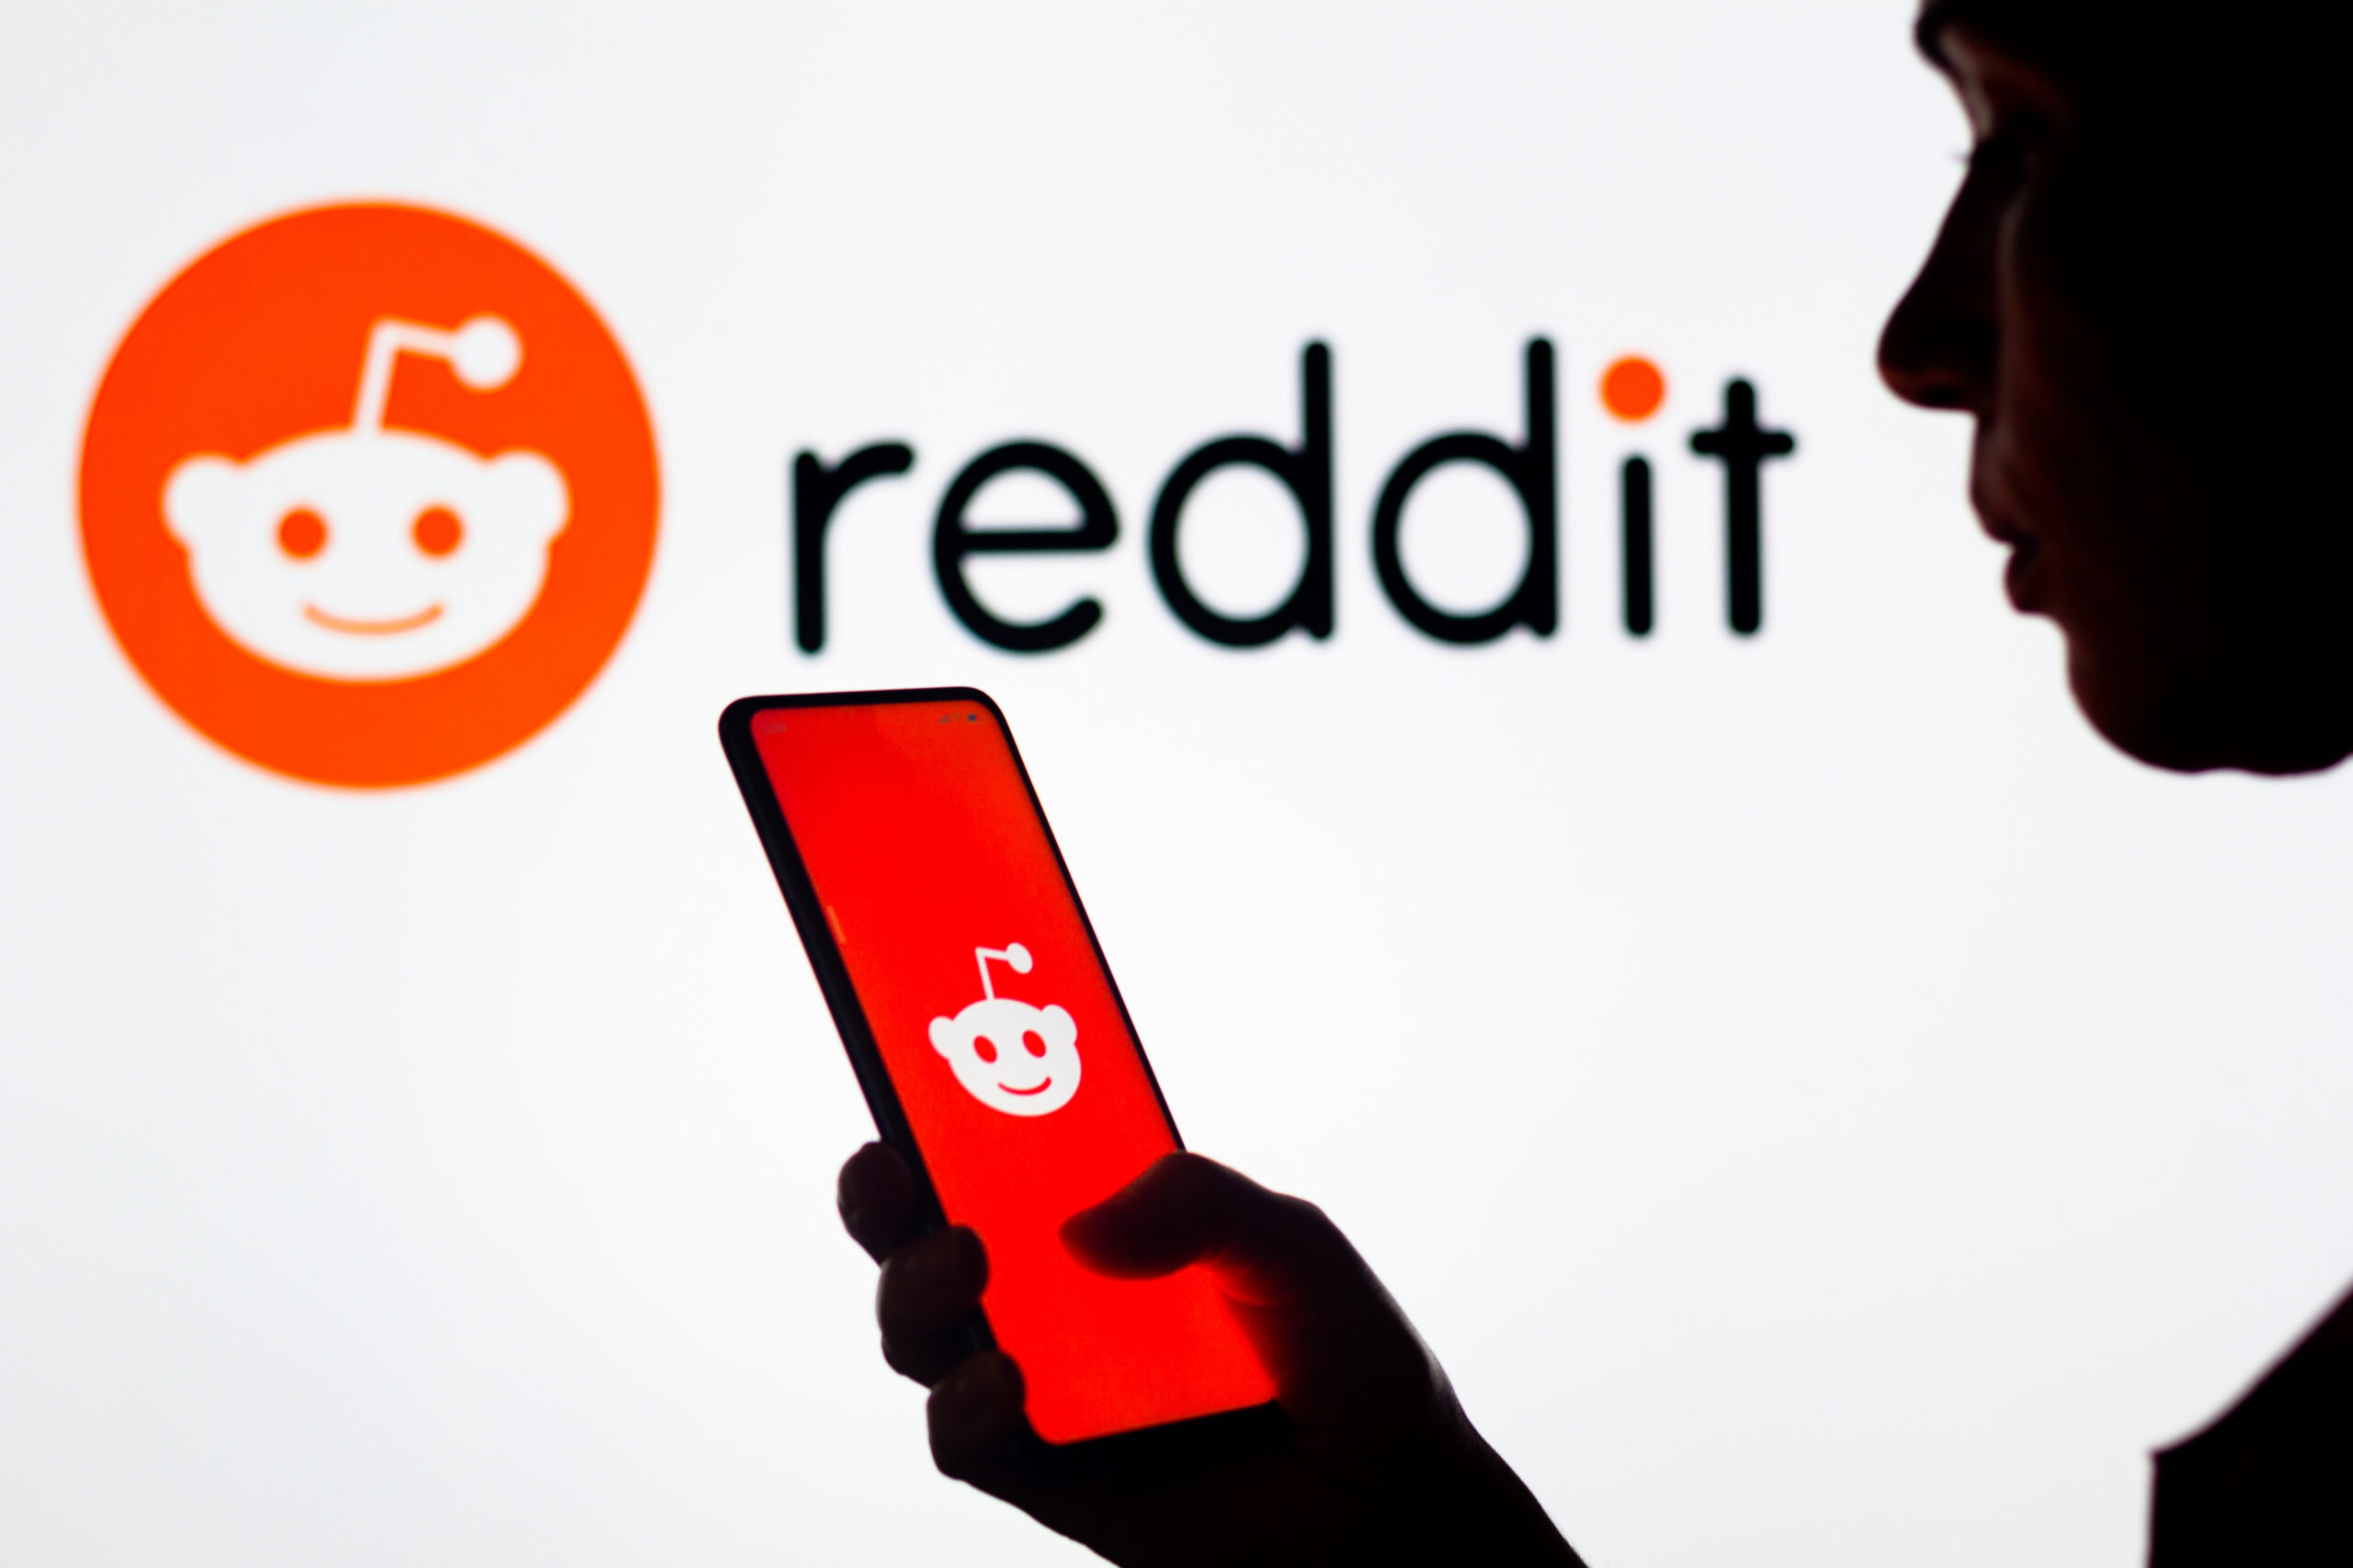 In this photo illustration, a woman’s silhouette holds a smartphone with the Reddit logo displayed.